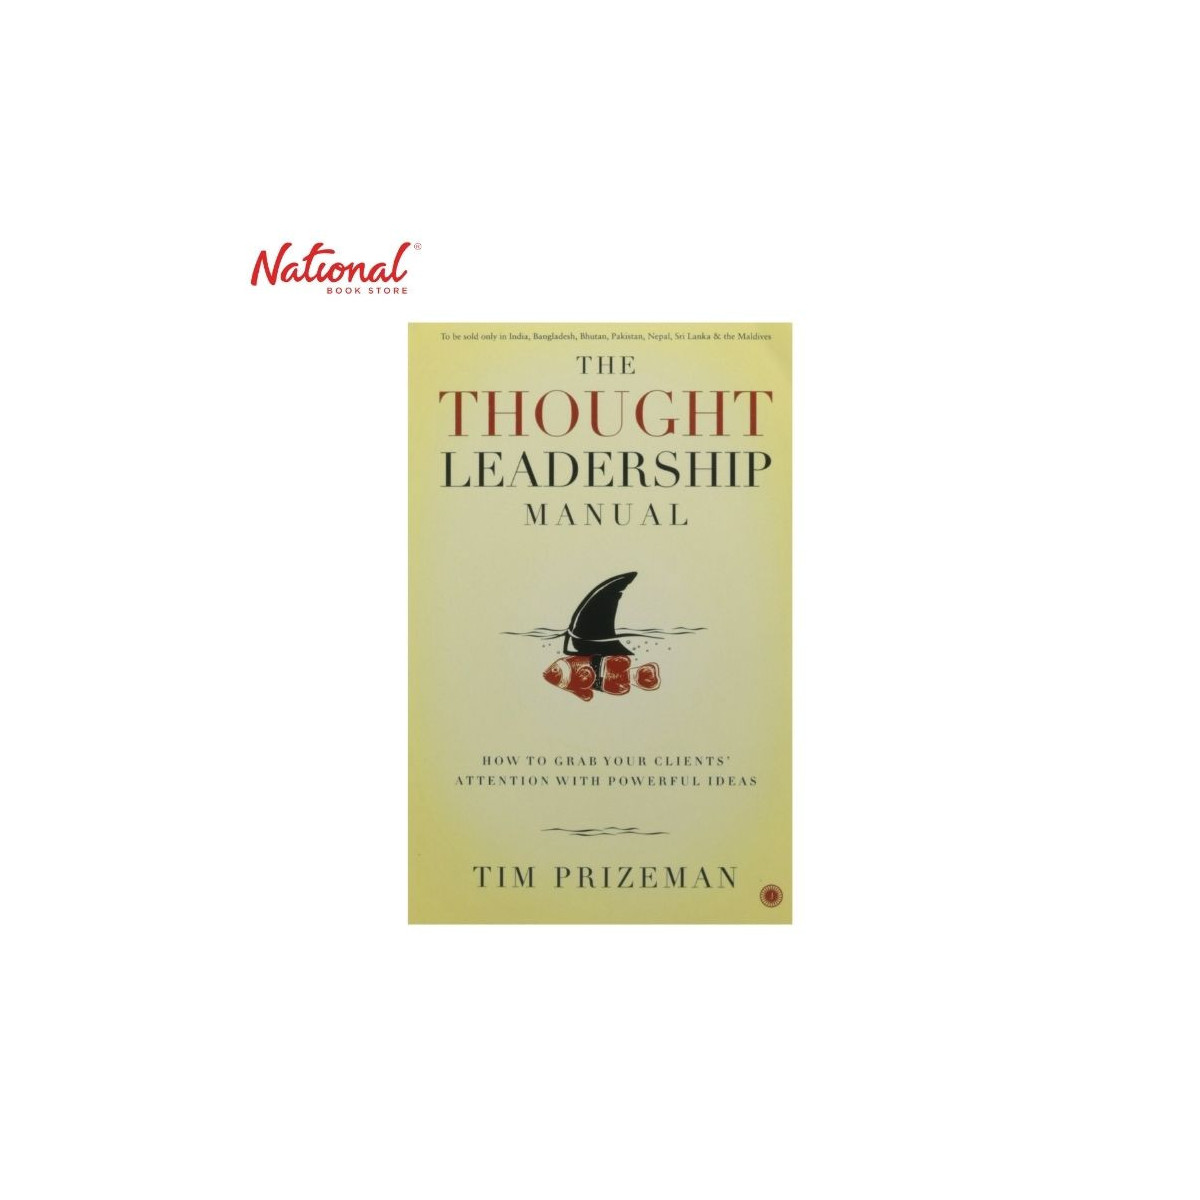 The Thought Leadership Manual Trade Paperback by Tim Prizeman